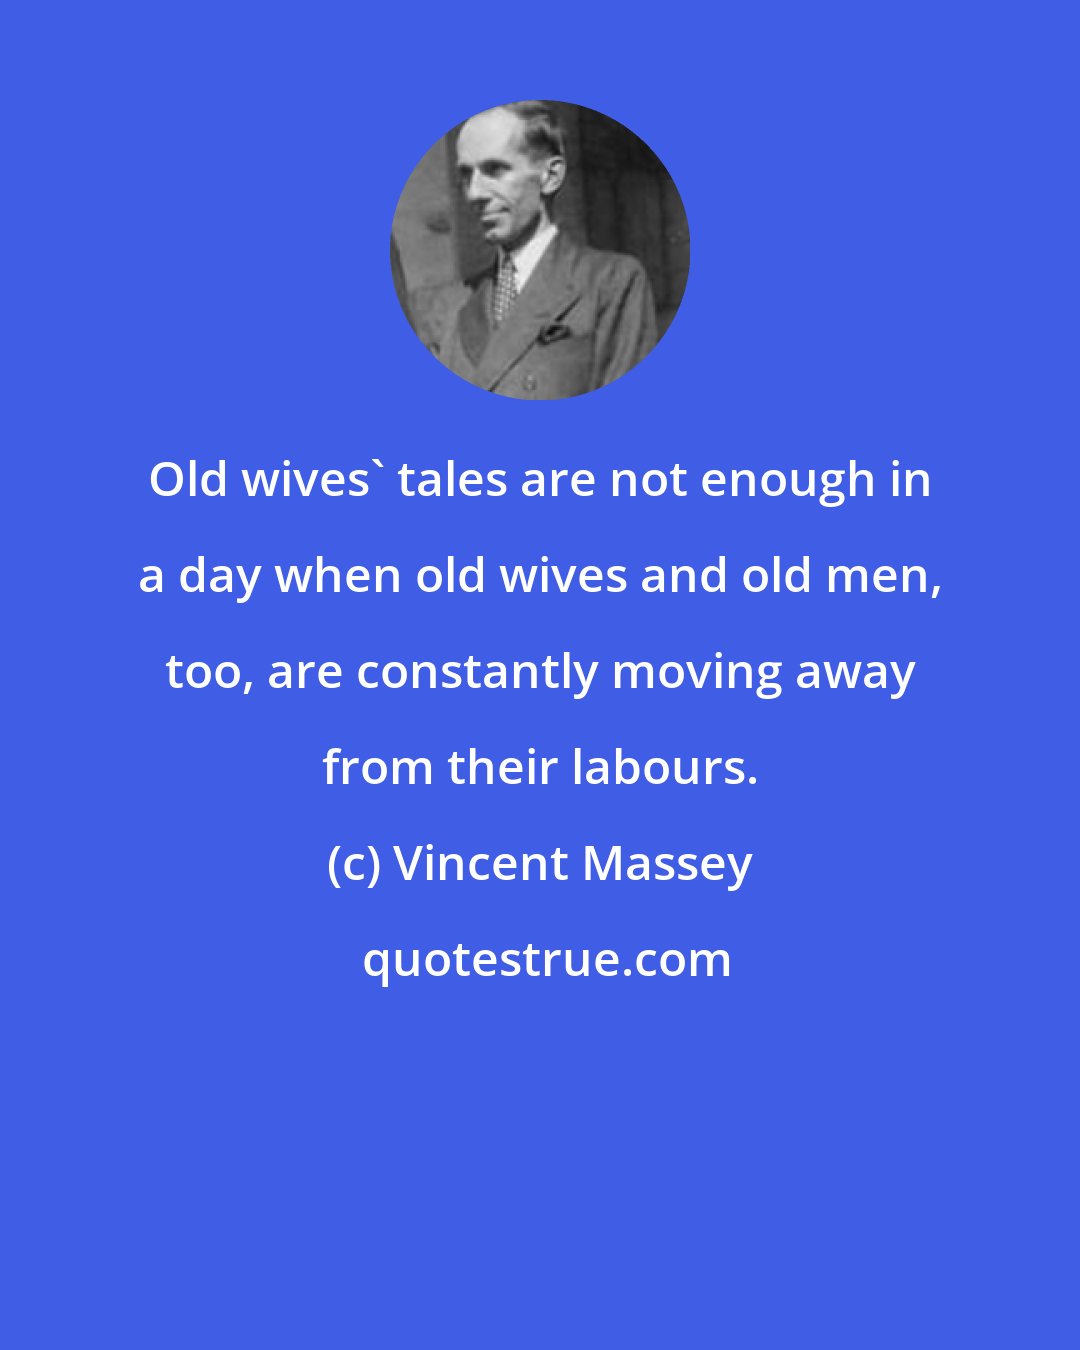 Vincent Massey: Old wives' tales are not enough in a day when old wives and old men, too, are constantly moving away from their labours.